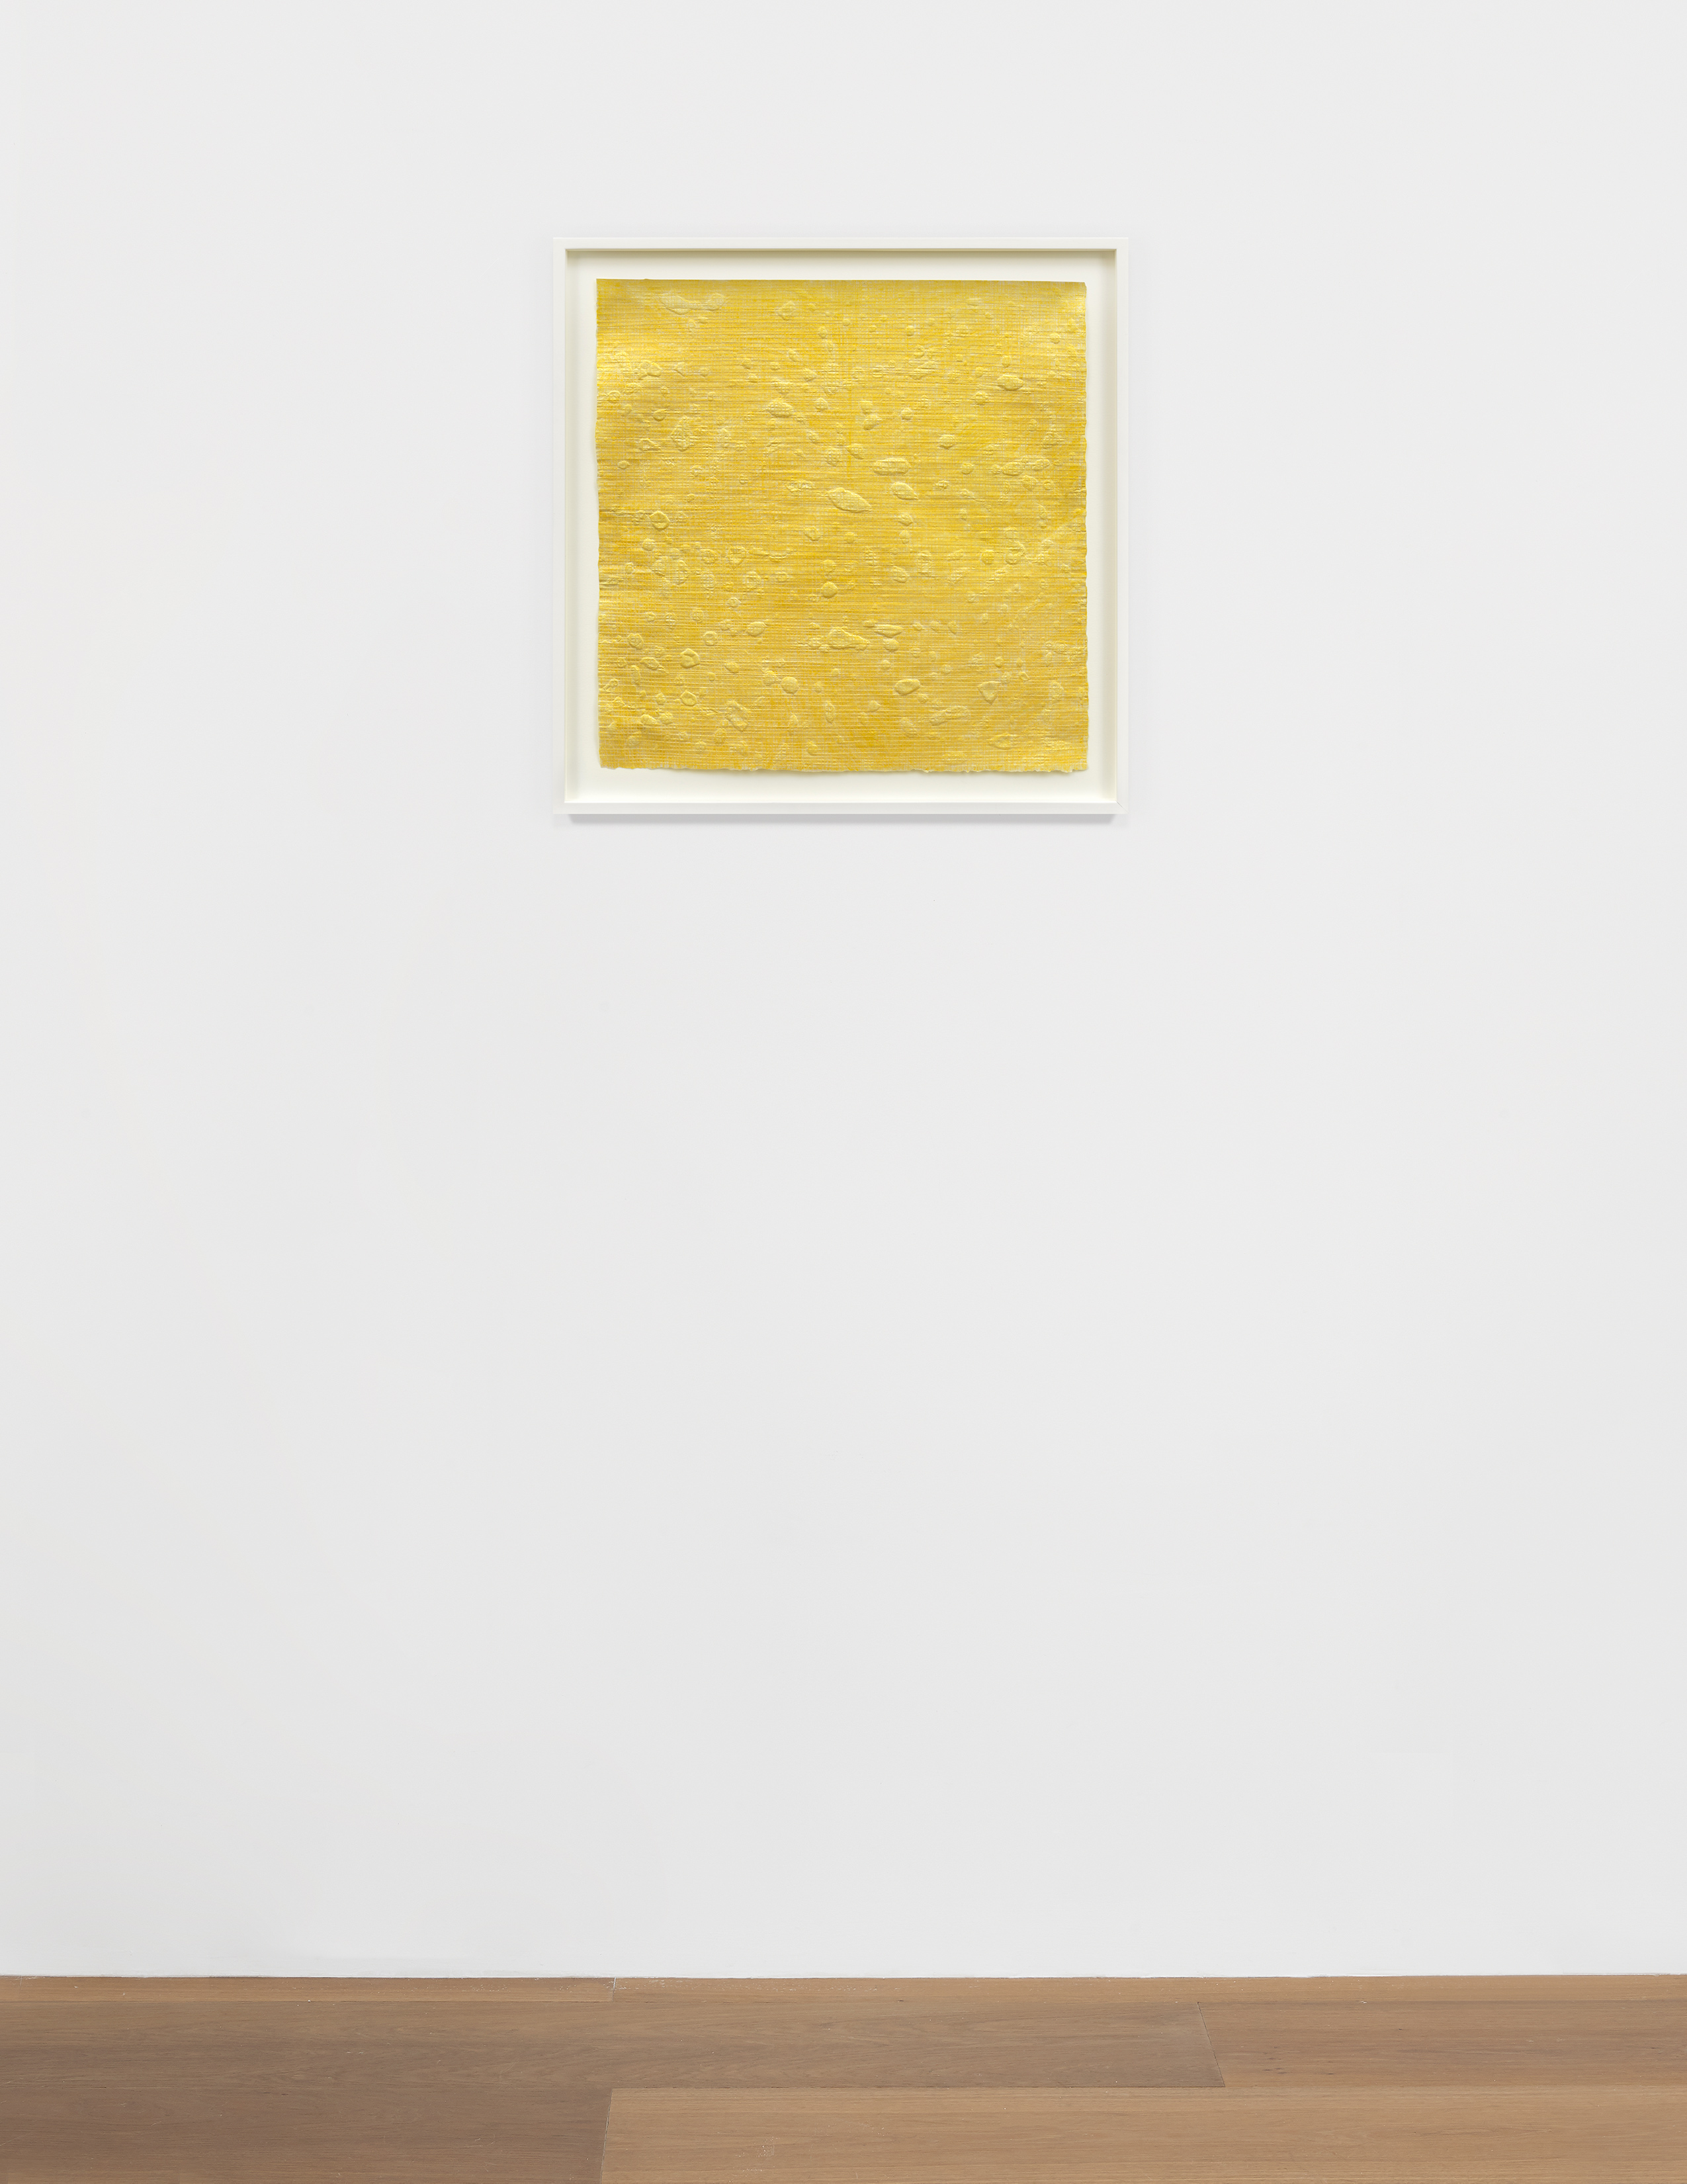 Installation view of Eleanore Mikus's Untitled crayon on folded abaca paper work